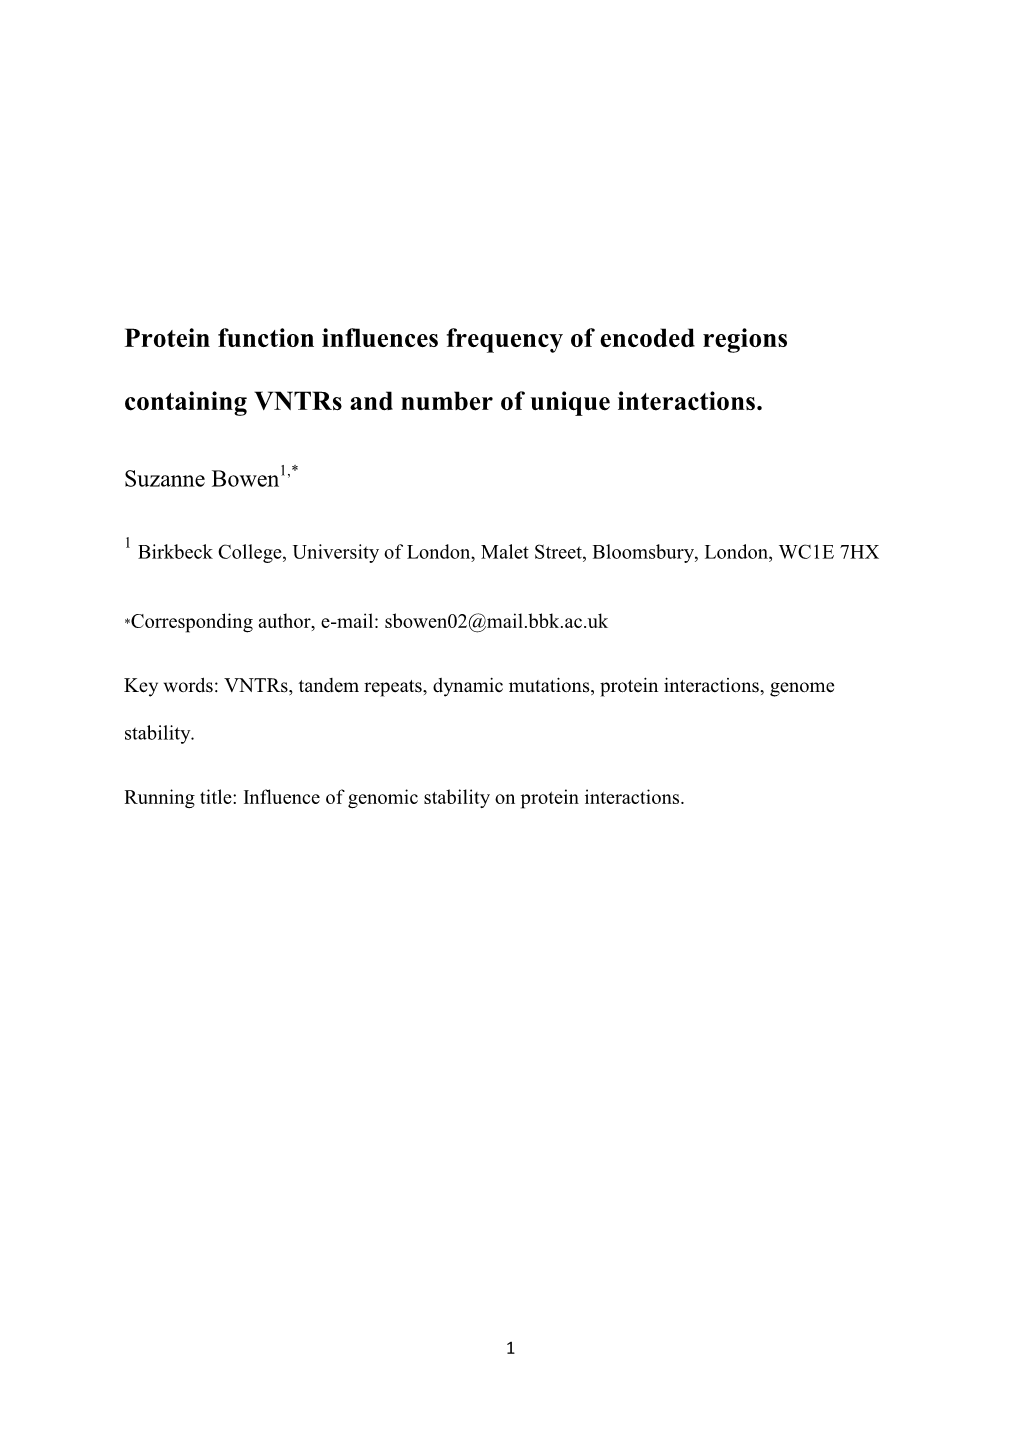 Protein Function Influences Frequency of Encoded Regions Containing Vntrs and Number of Unique Interactions